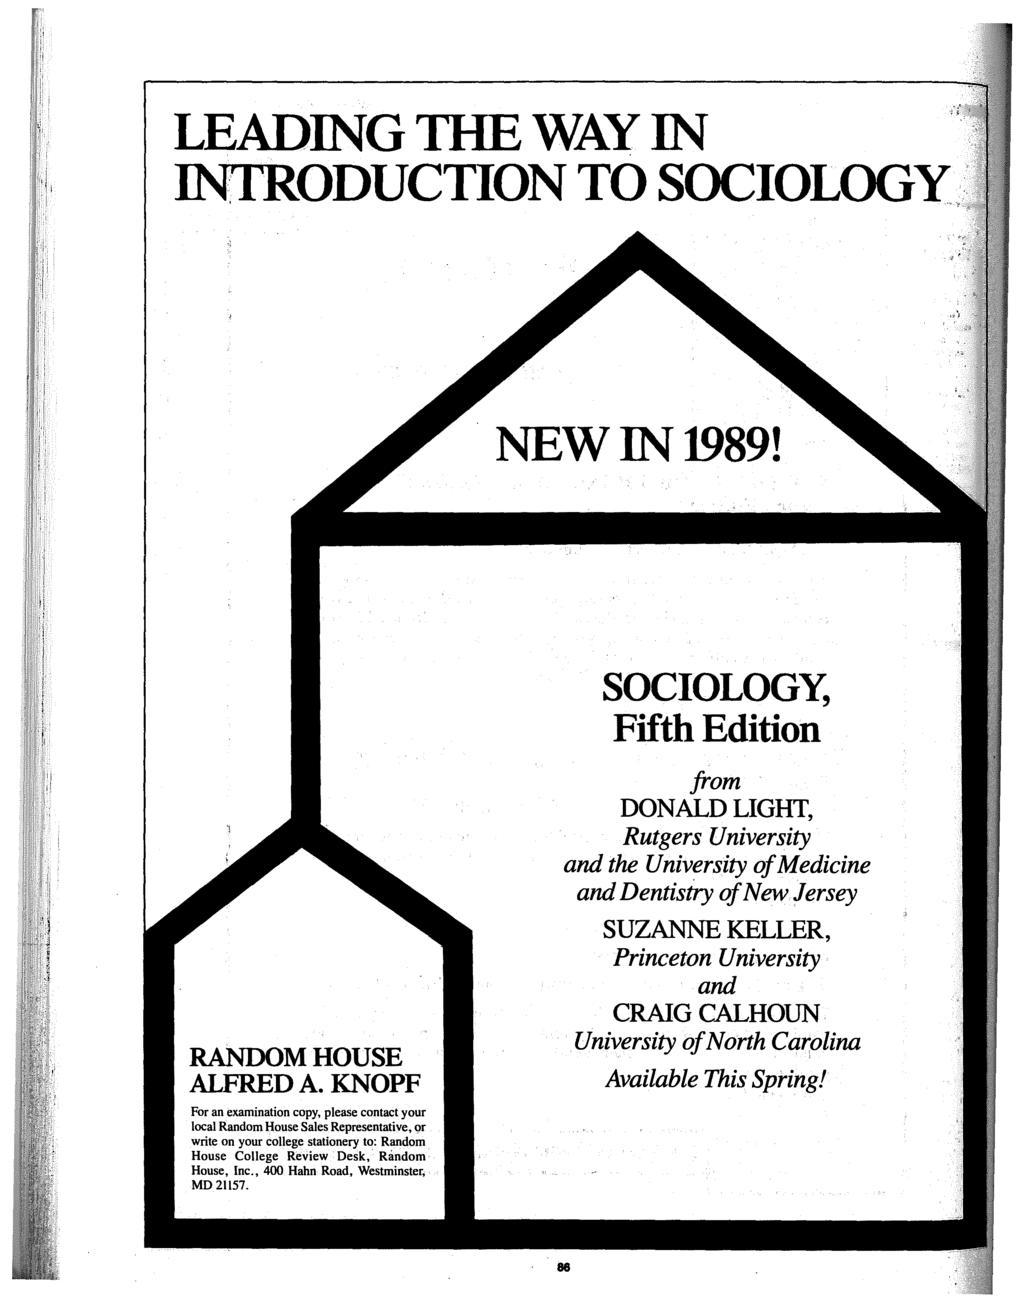 LEADING THE WAY IN INTRODUCTION TO SOCIOLOGY.:' NEWIN1989! SOCIOLOGY, Fifth Edition RANDOM HOUSE ALFRED A.